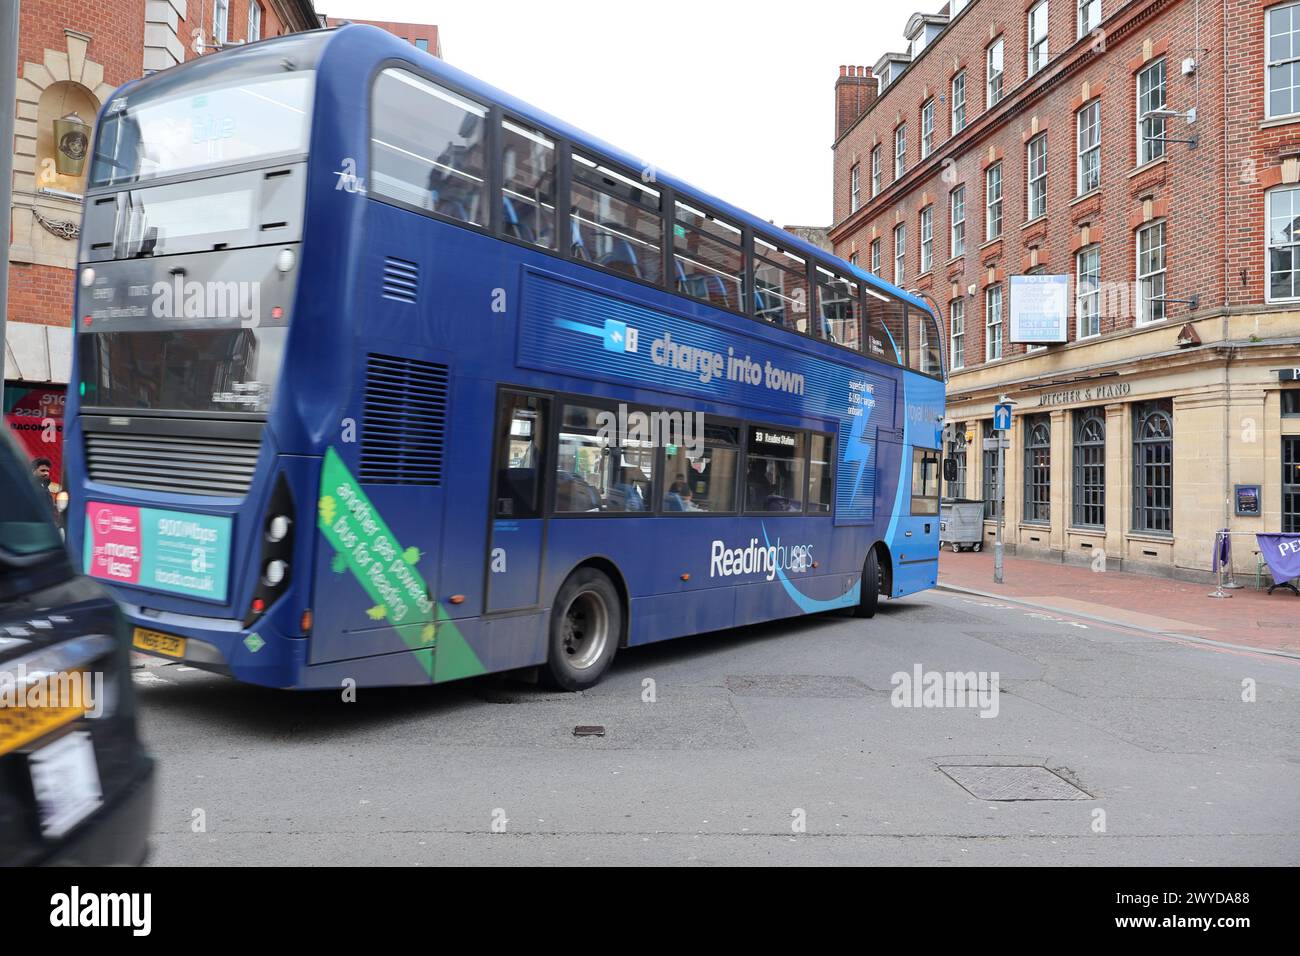 Reading Buses blue bus charges into town. Charles Dye / Alamy Live News Stock Photo